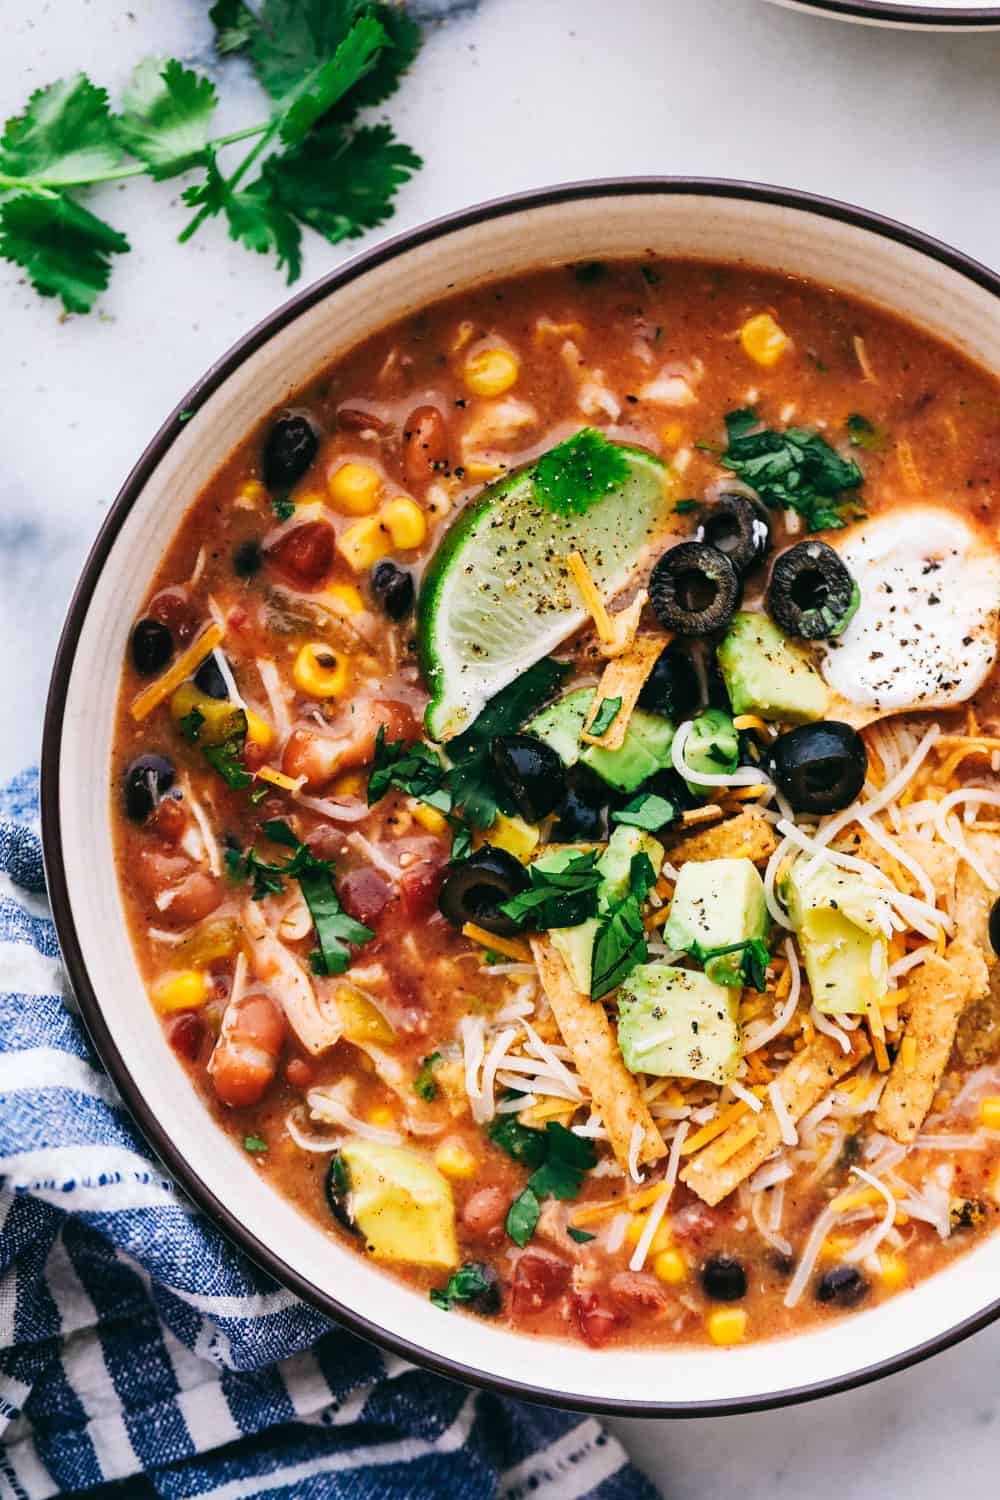 https://therecipecritic.com/wp-content/uploads/2020/03/8_can_taco_soup3.jpg